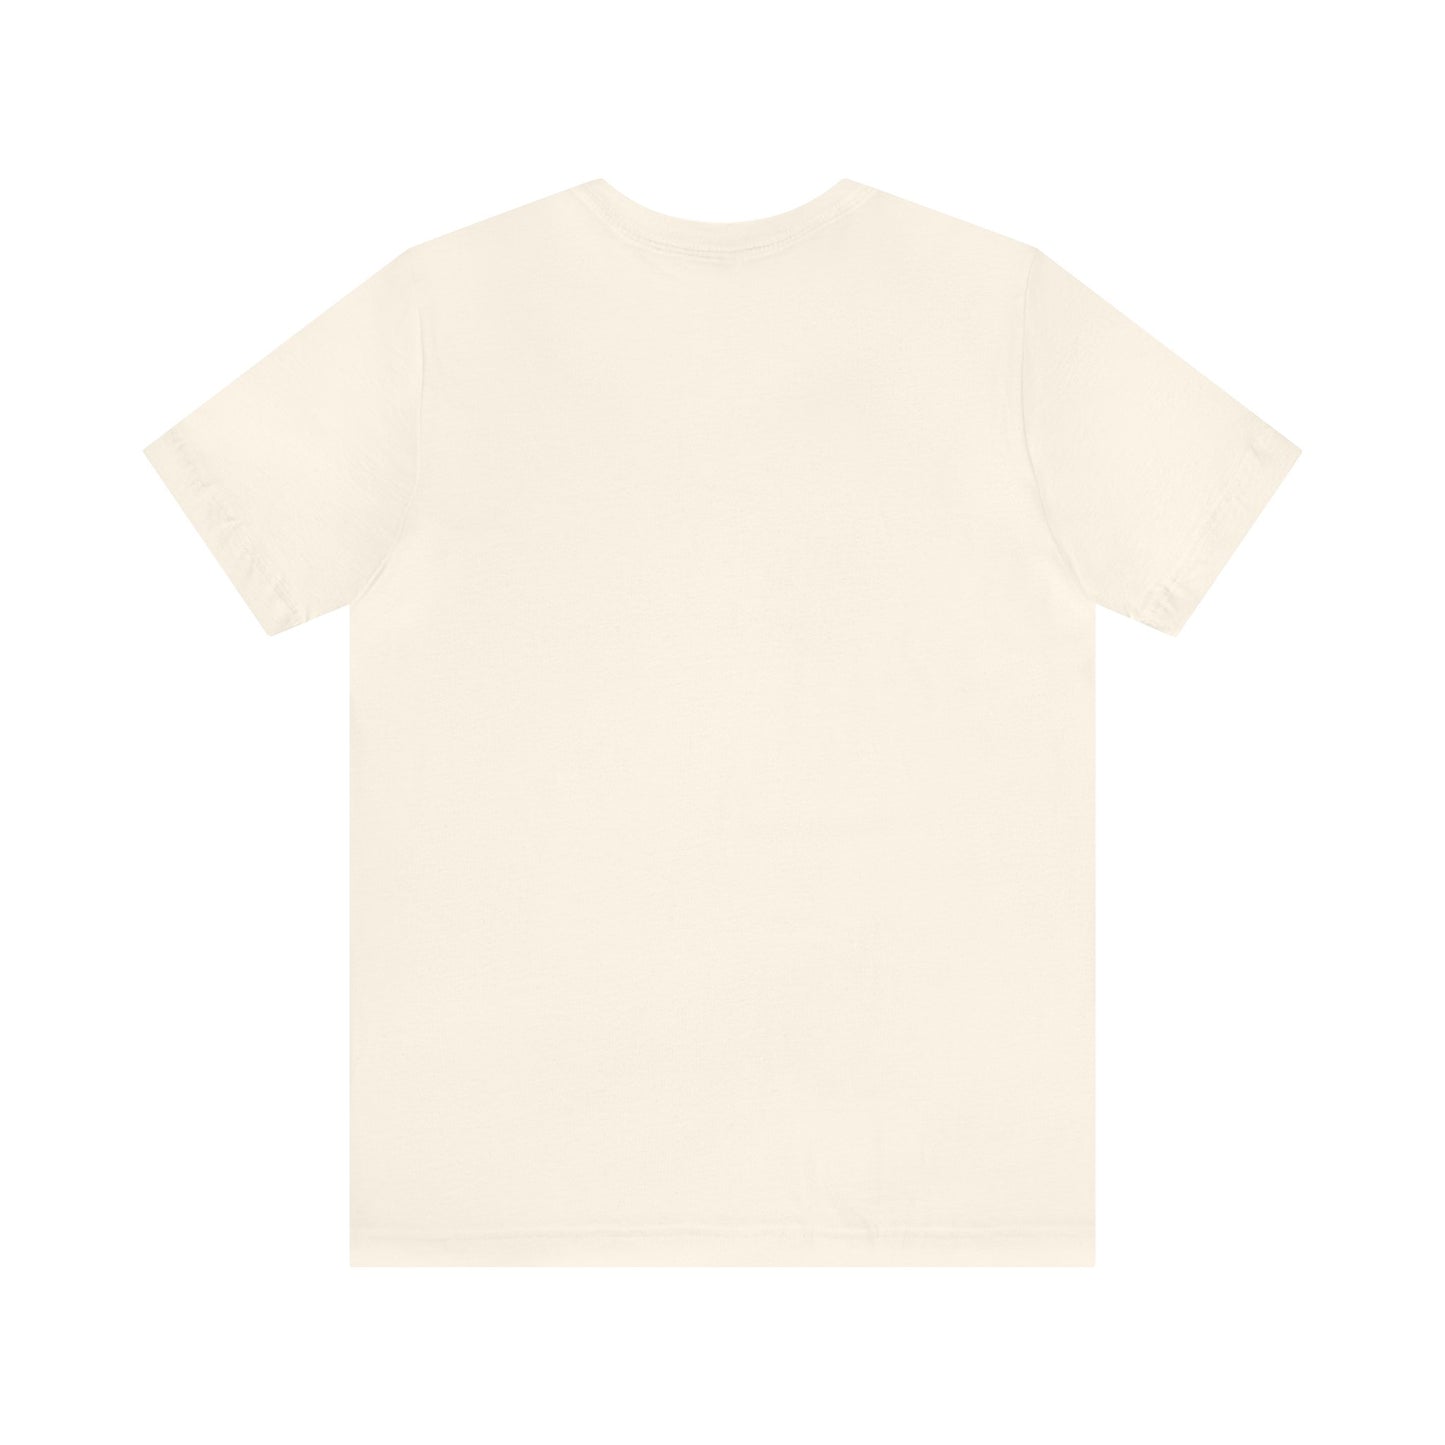 S&S All Saints Have Scars Cracked Tee